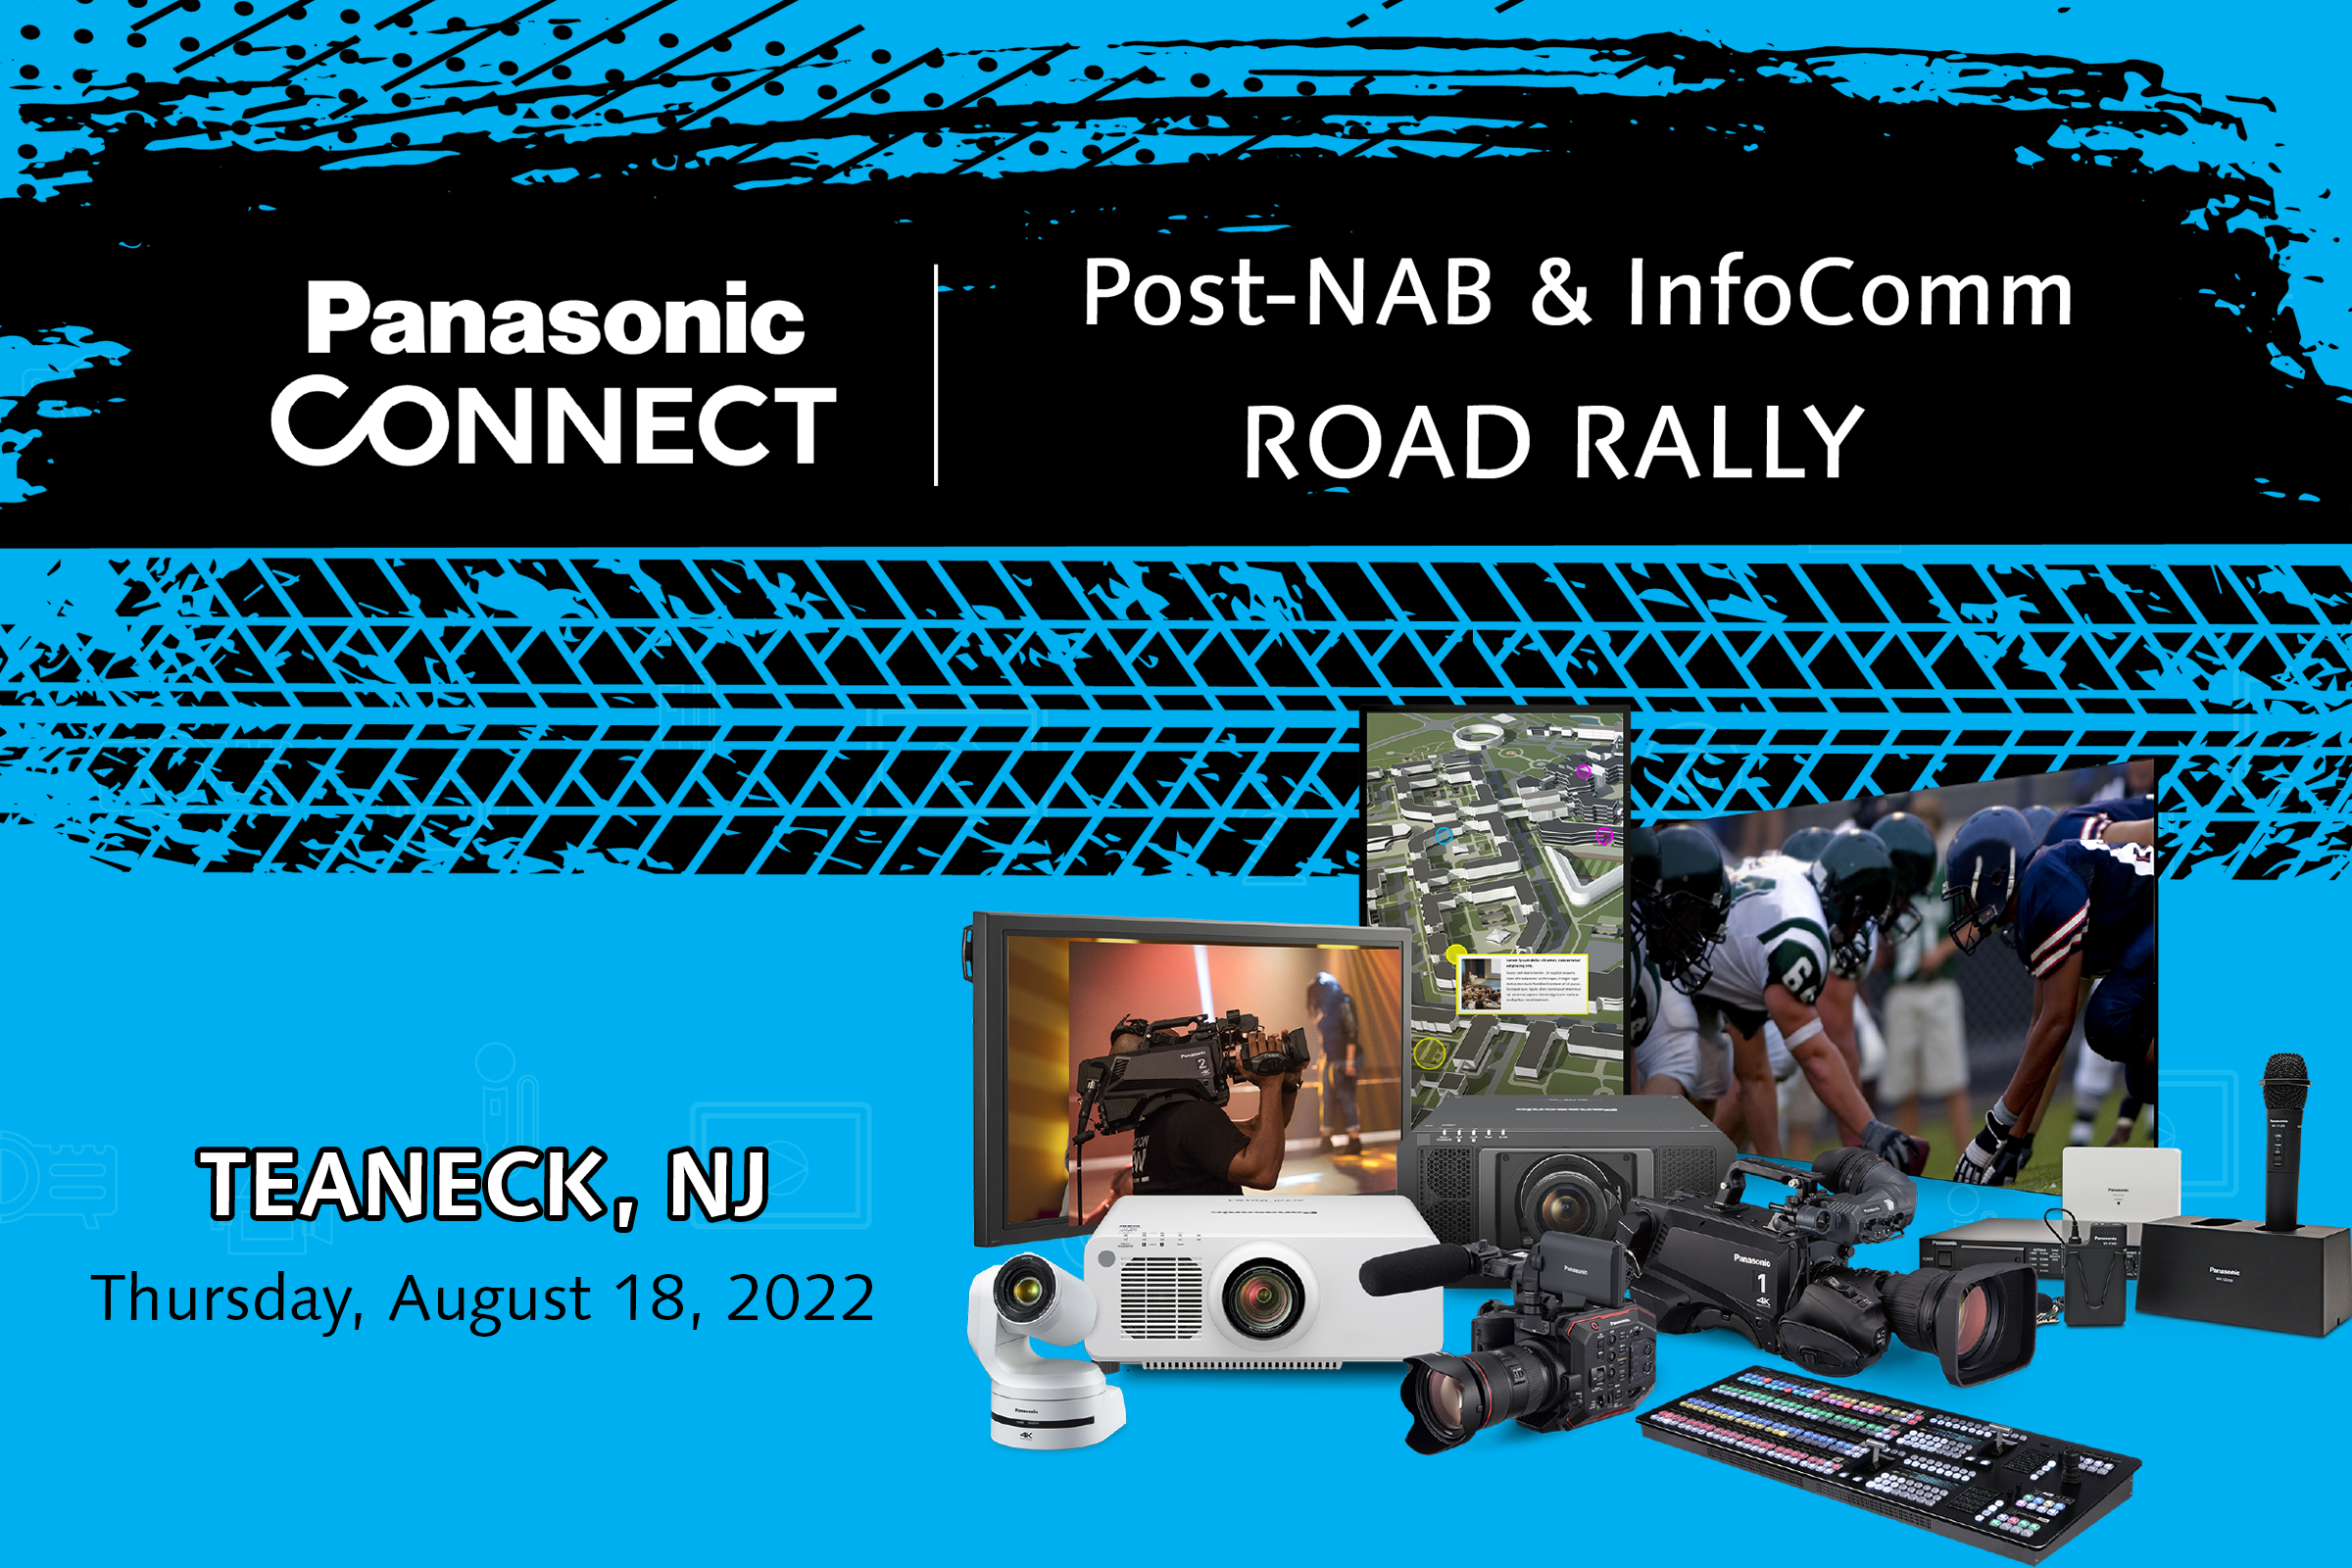 Panasonic Connect Teaneck Road Rally Teaser - New Lock Up